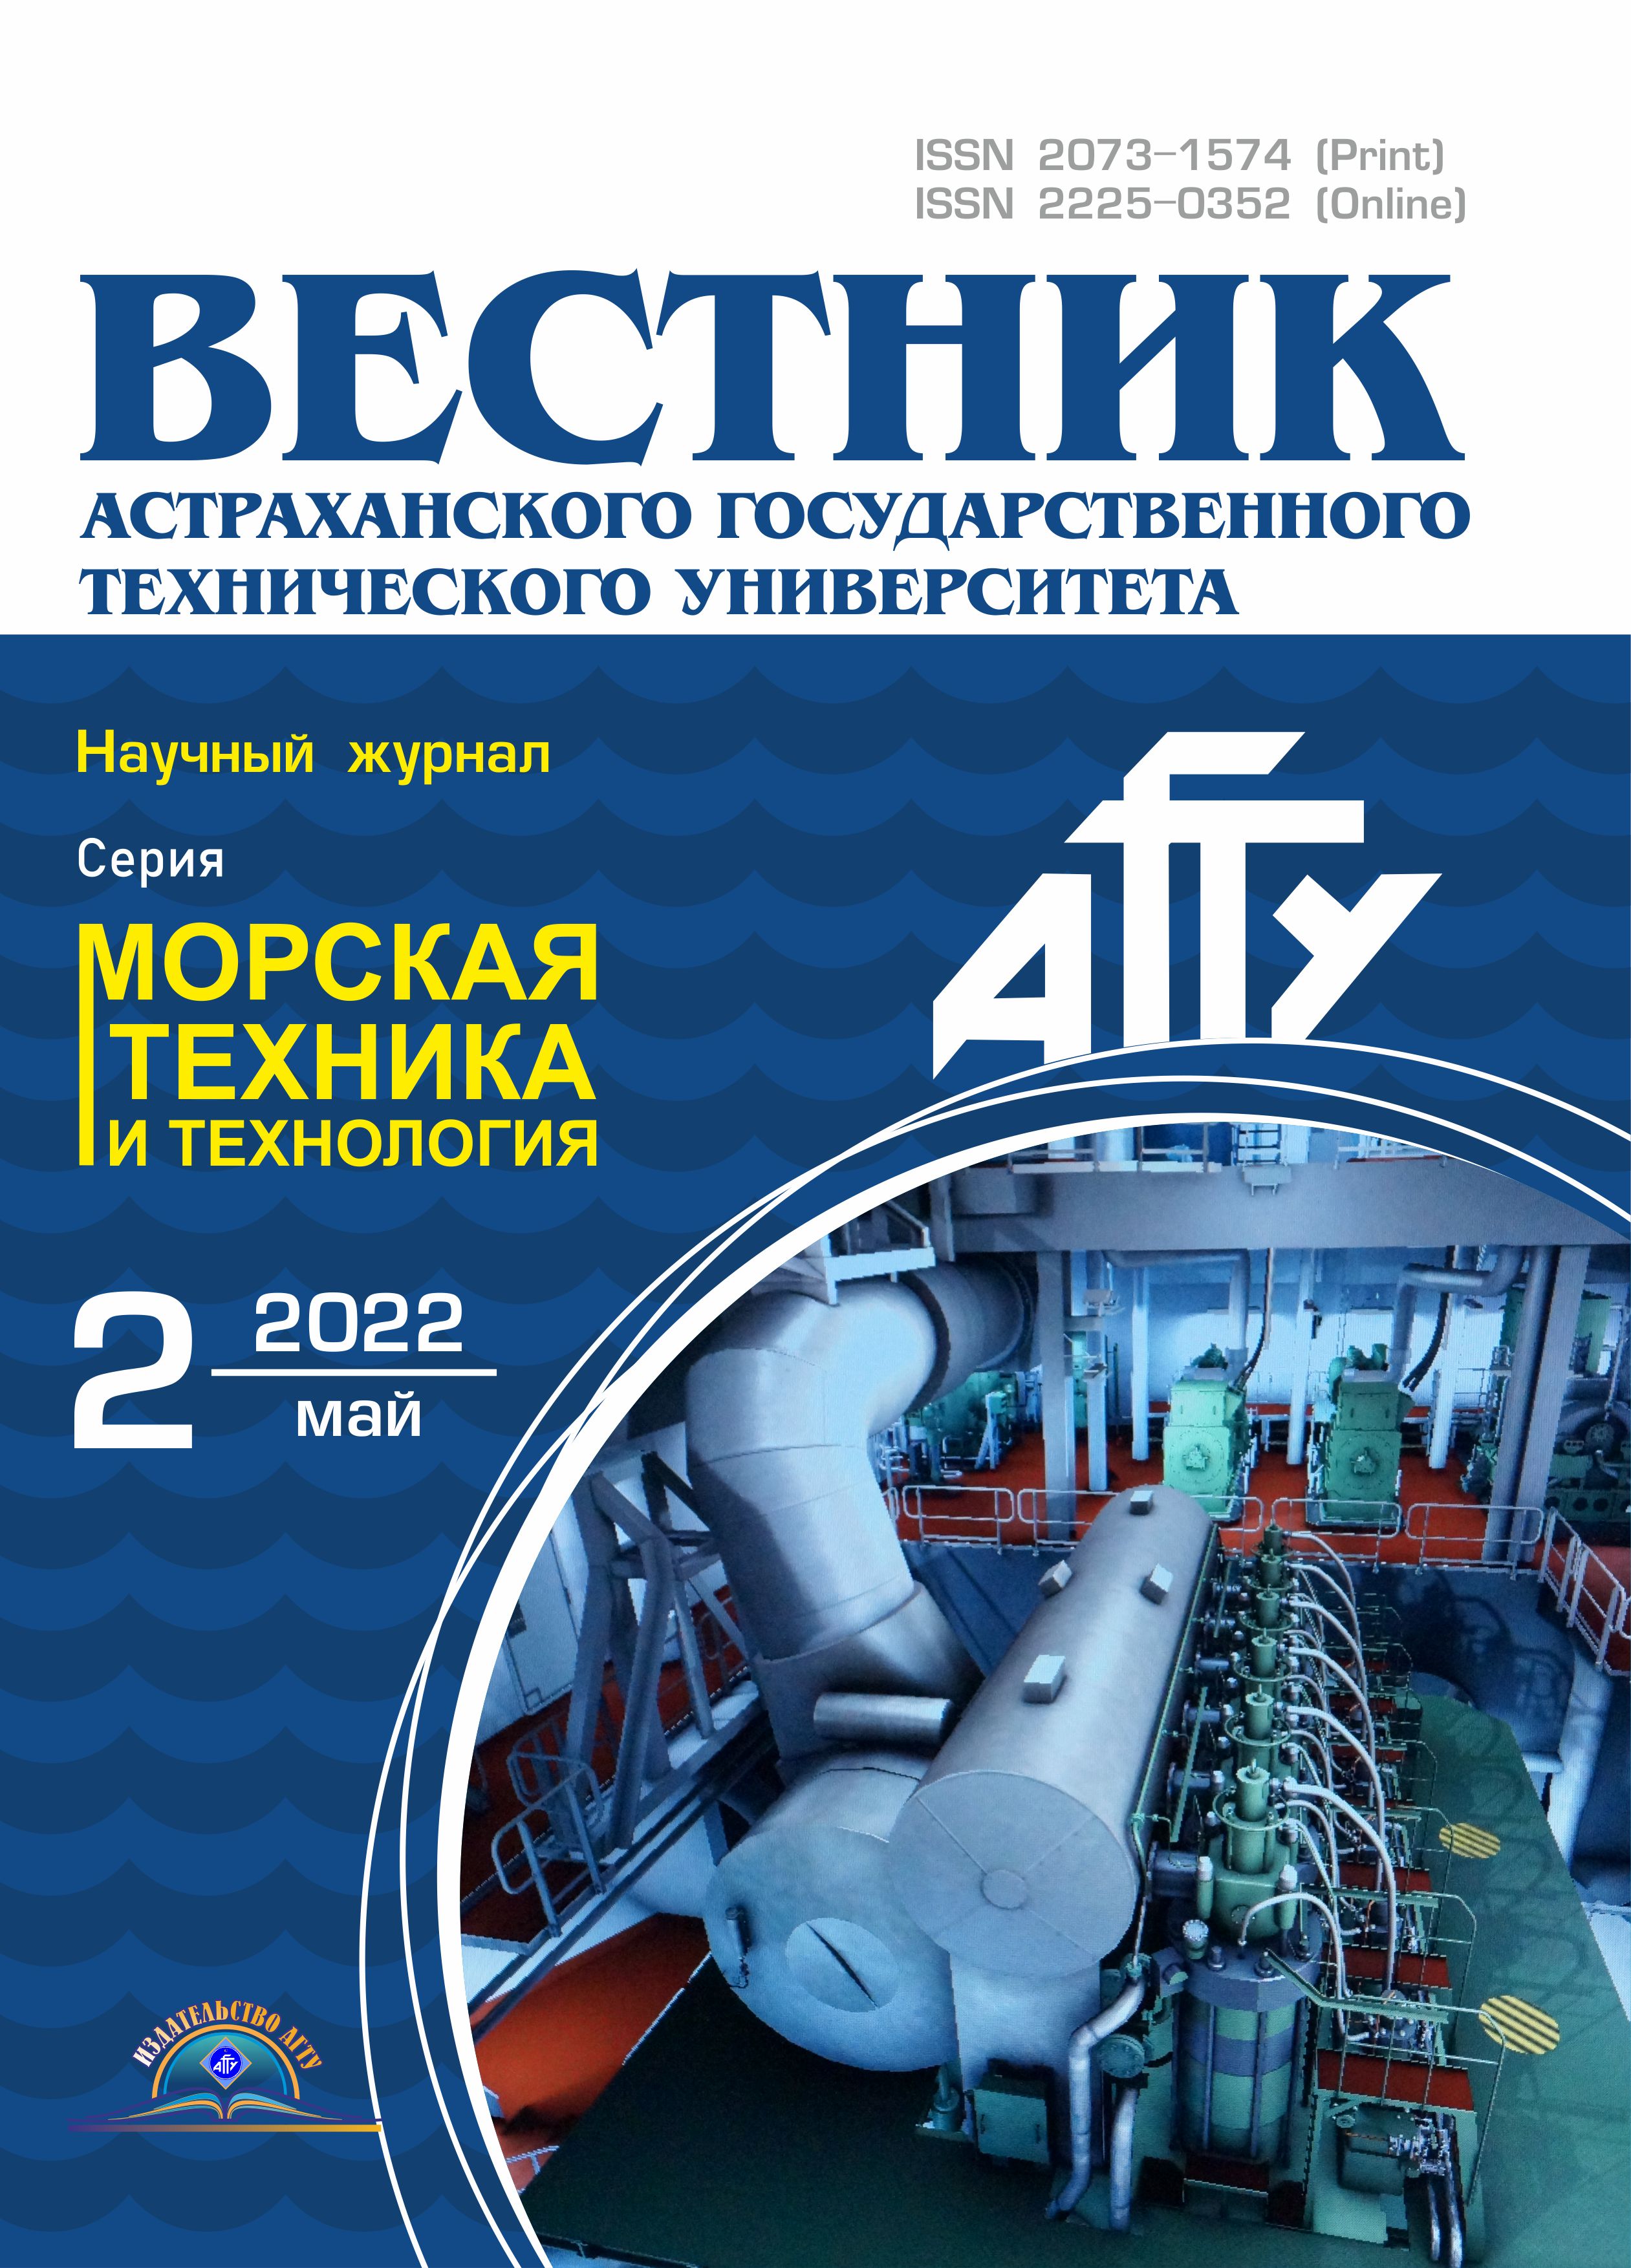                         Experience in application of composite materials in shipbuilding
            